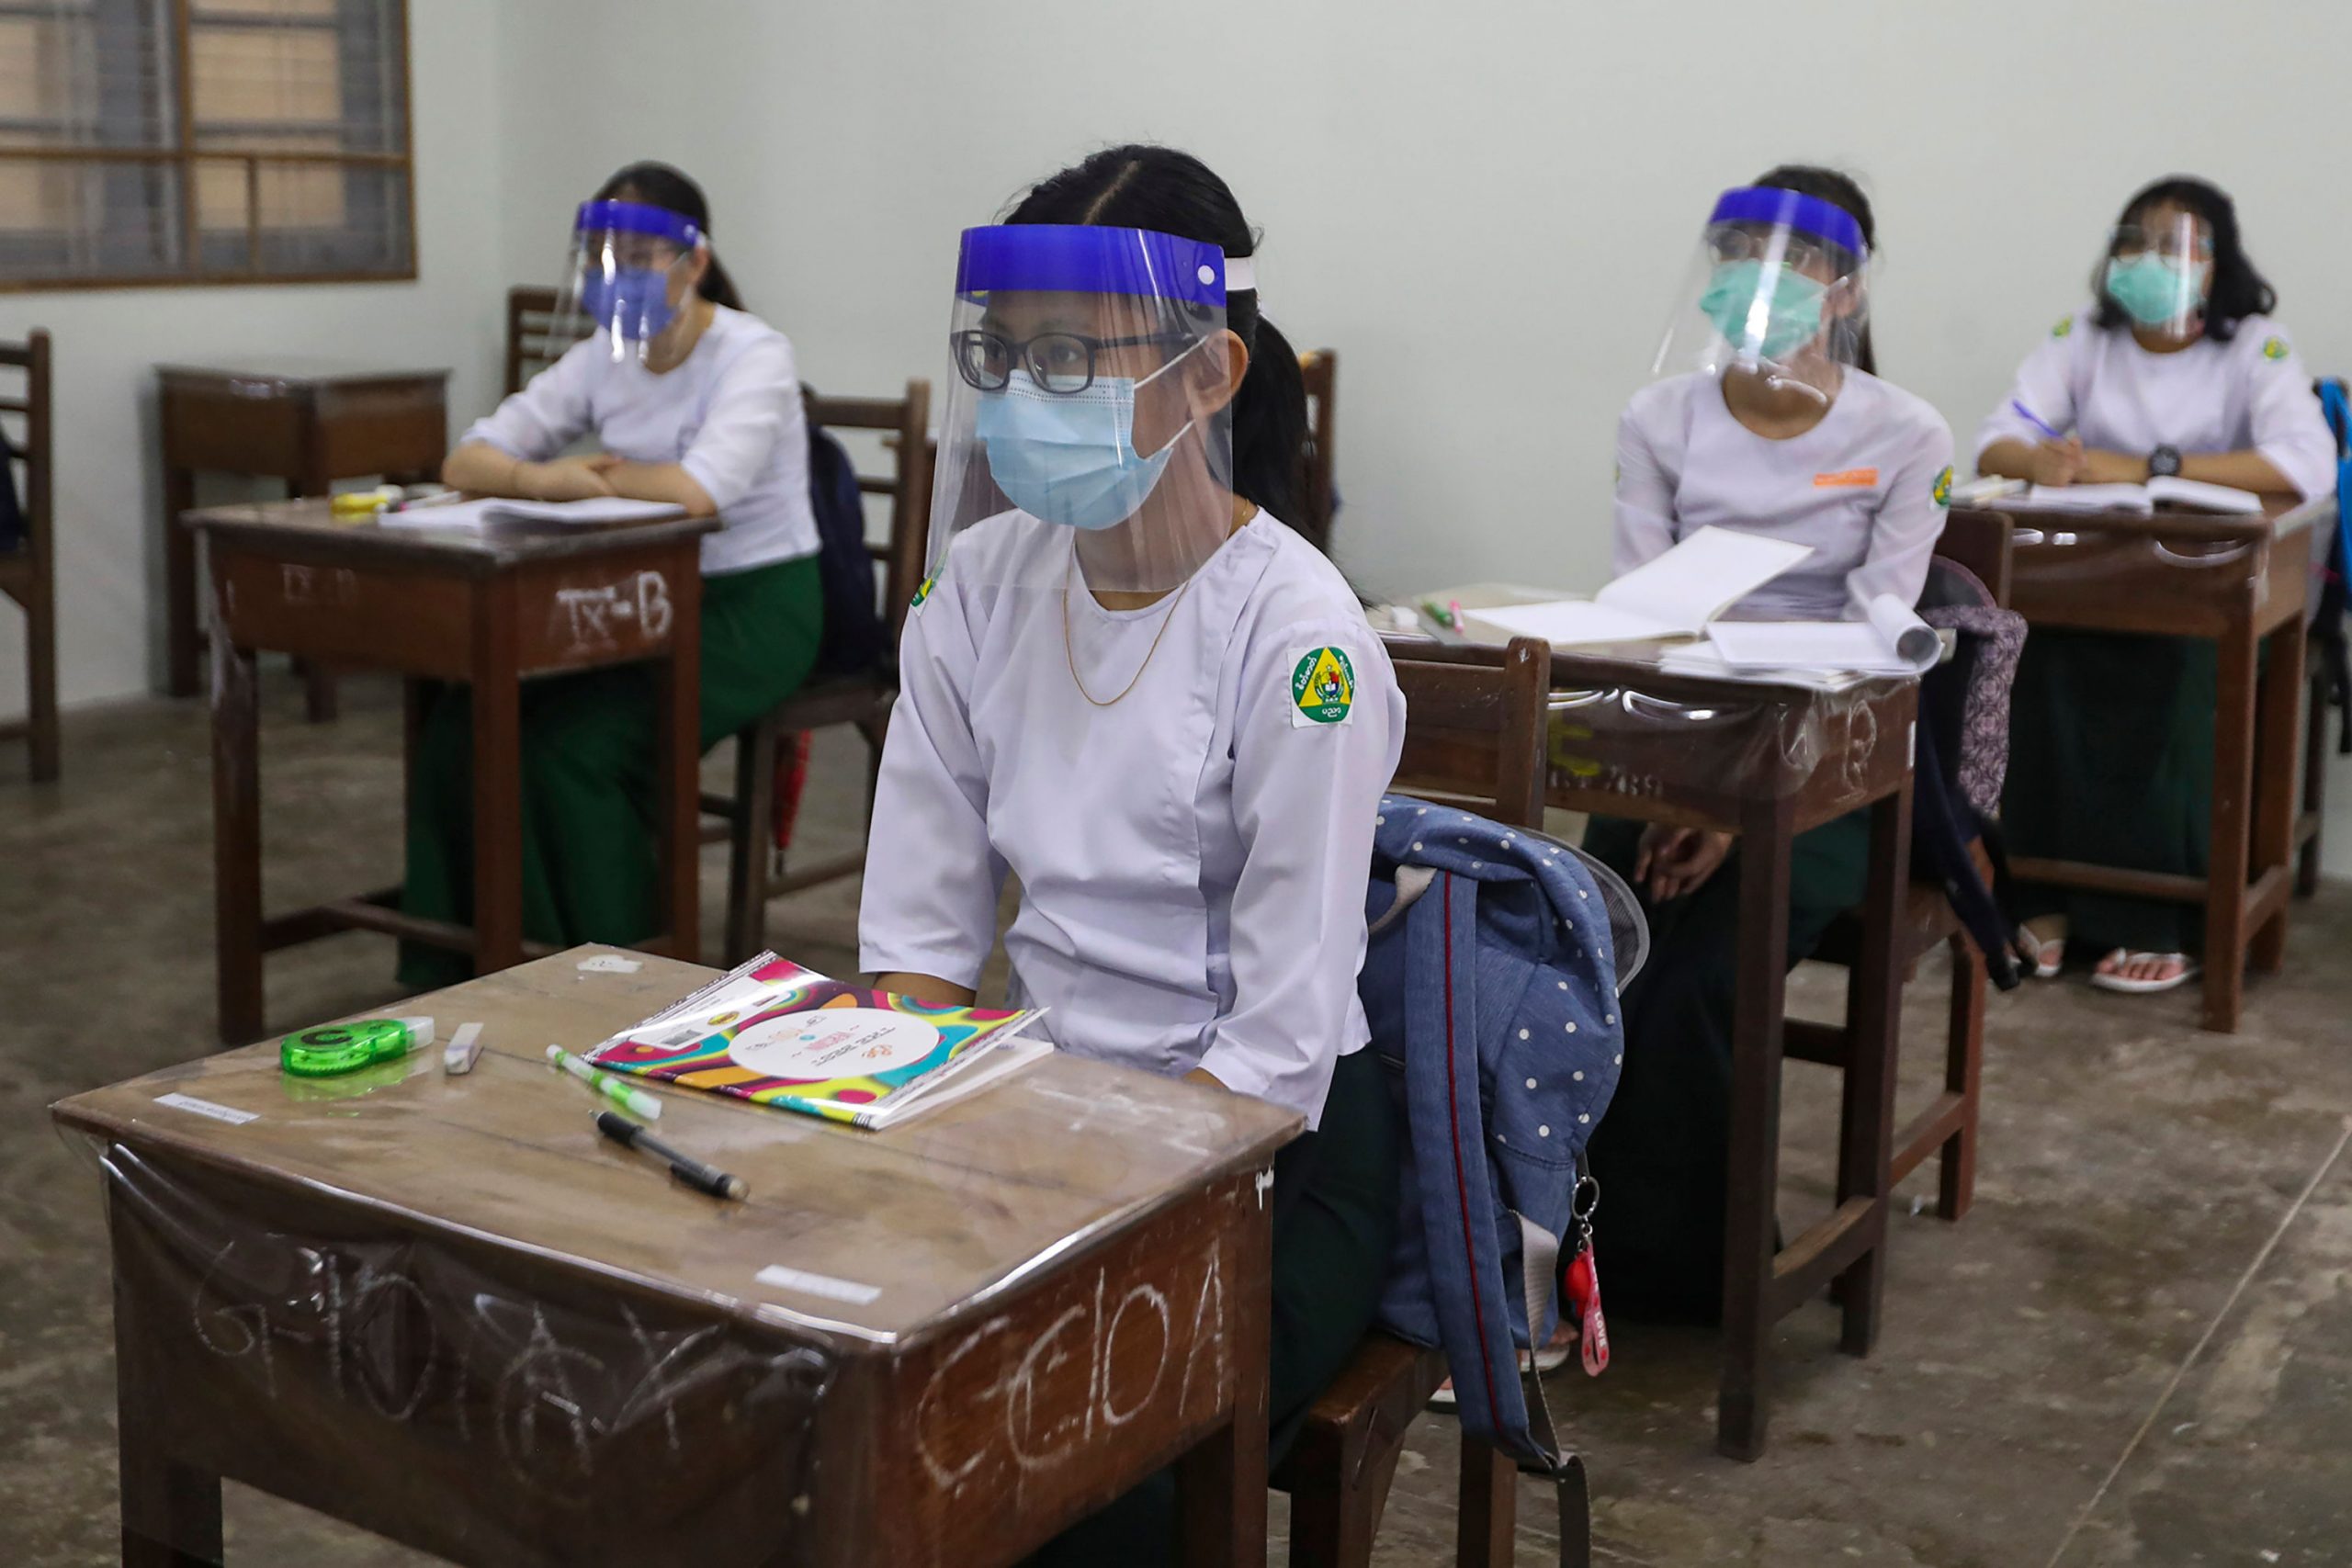 French children over 11 to wear masks at school